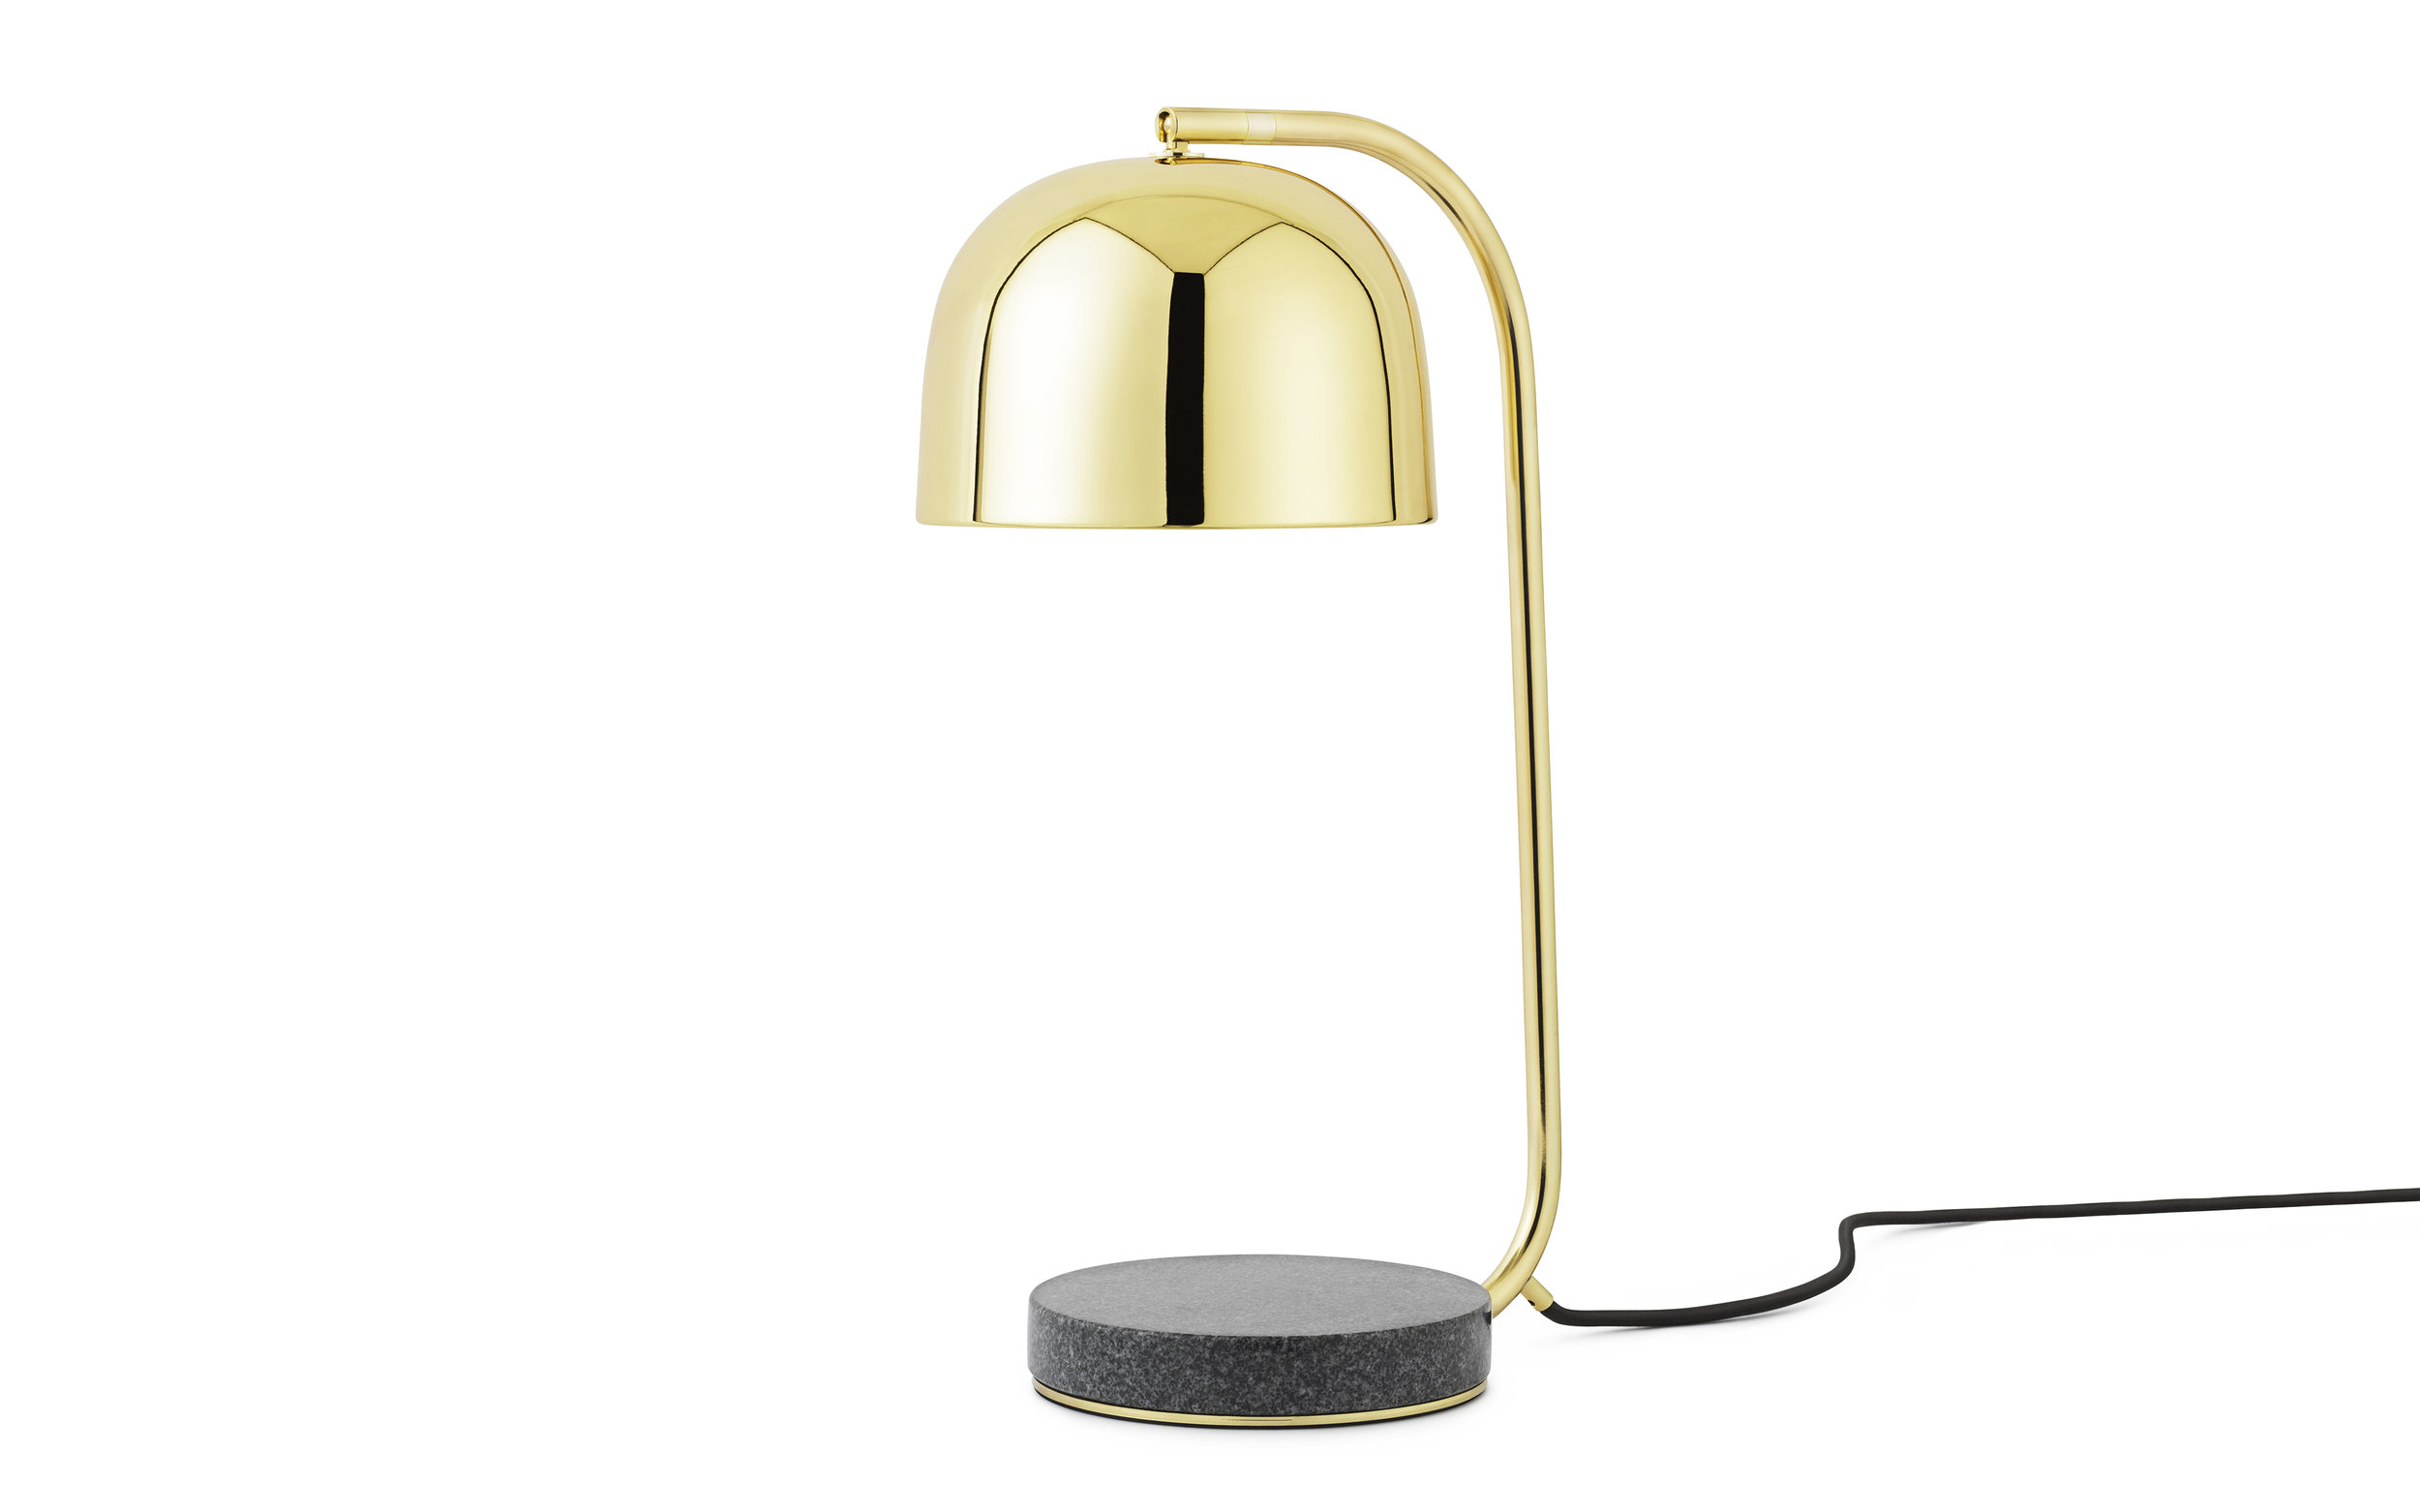  New collection - Grant Table Lamp by Norman Copenhagen  